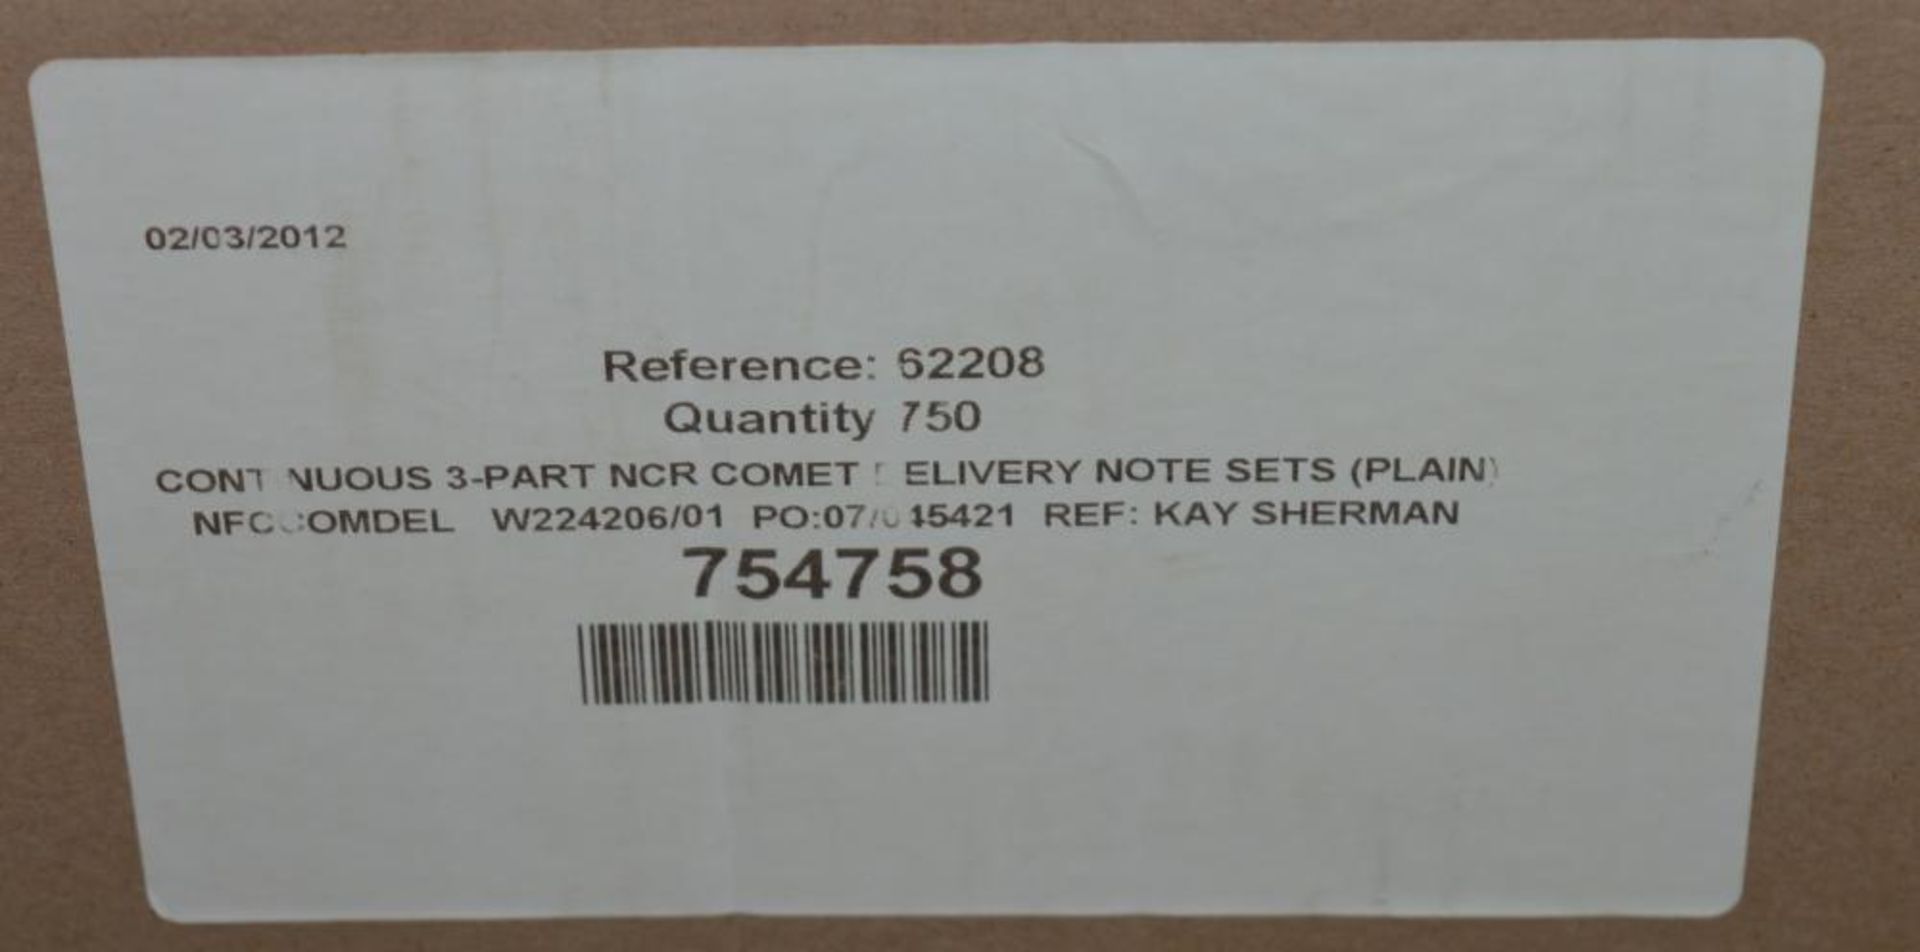 3 x Boxes of Continuous 3 Part Delivery Note Paper Sets - Plain - Quantity 750 Per Box - New Boxed - Image 3 of 4